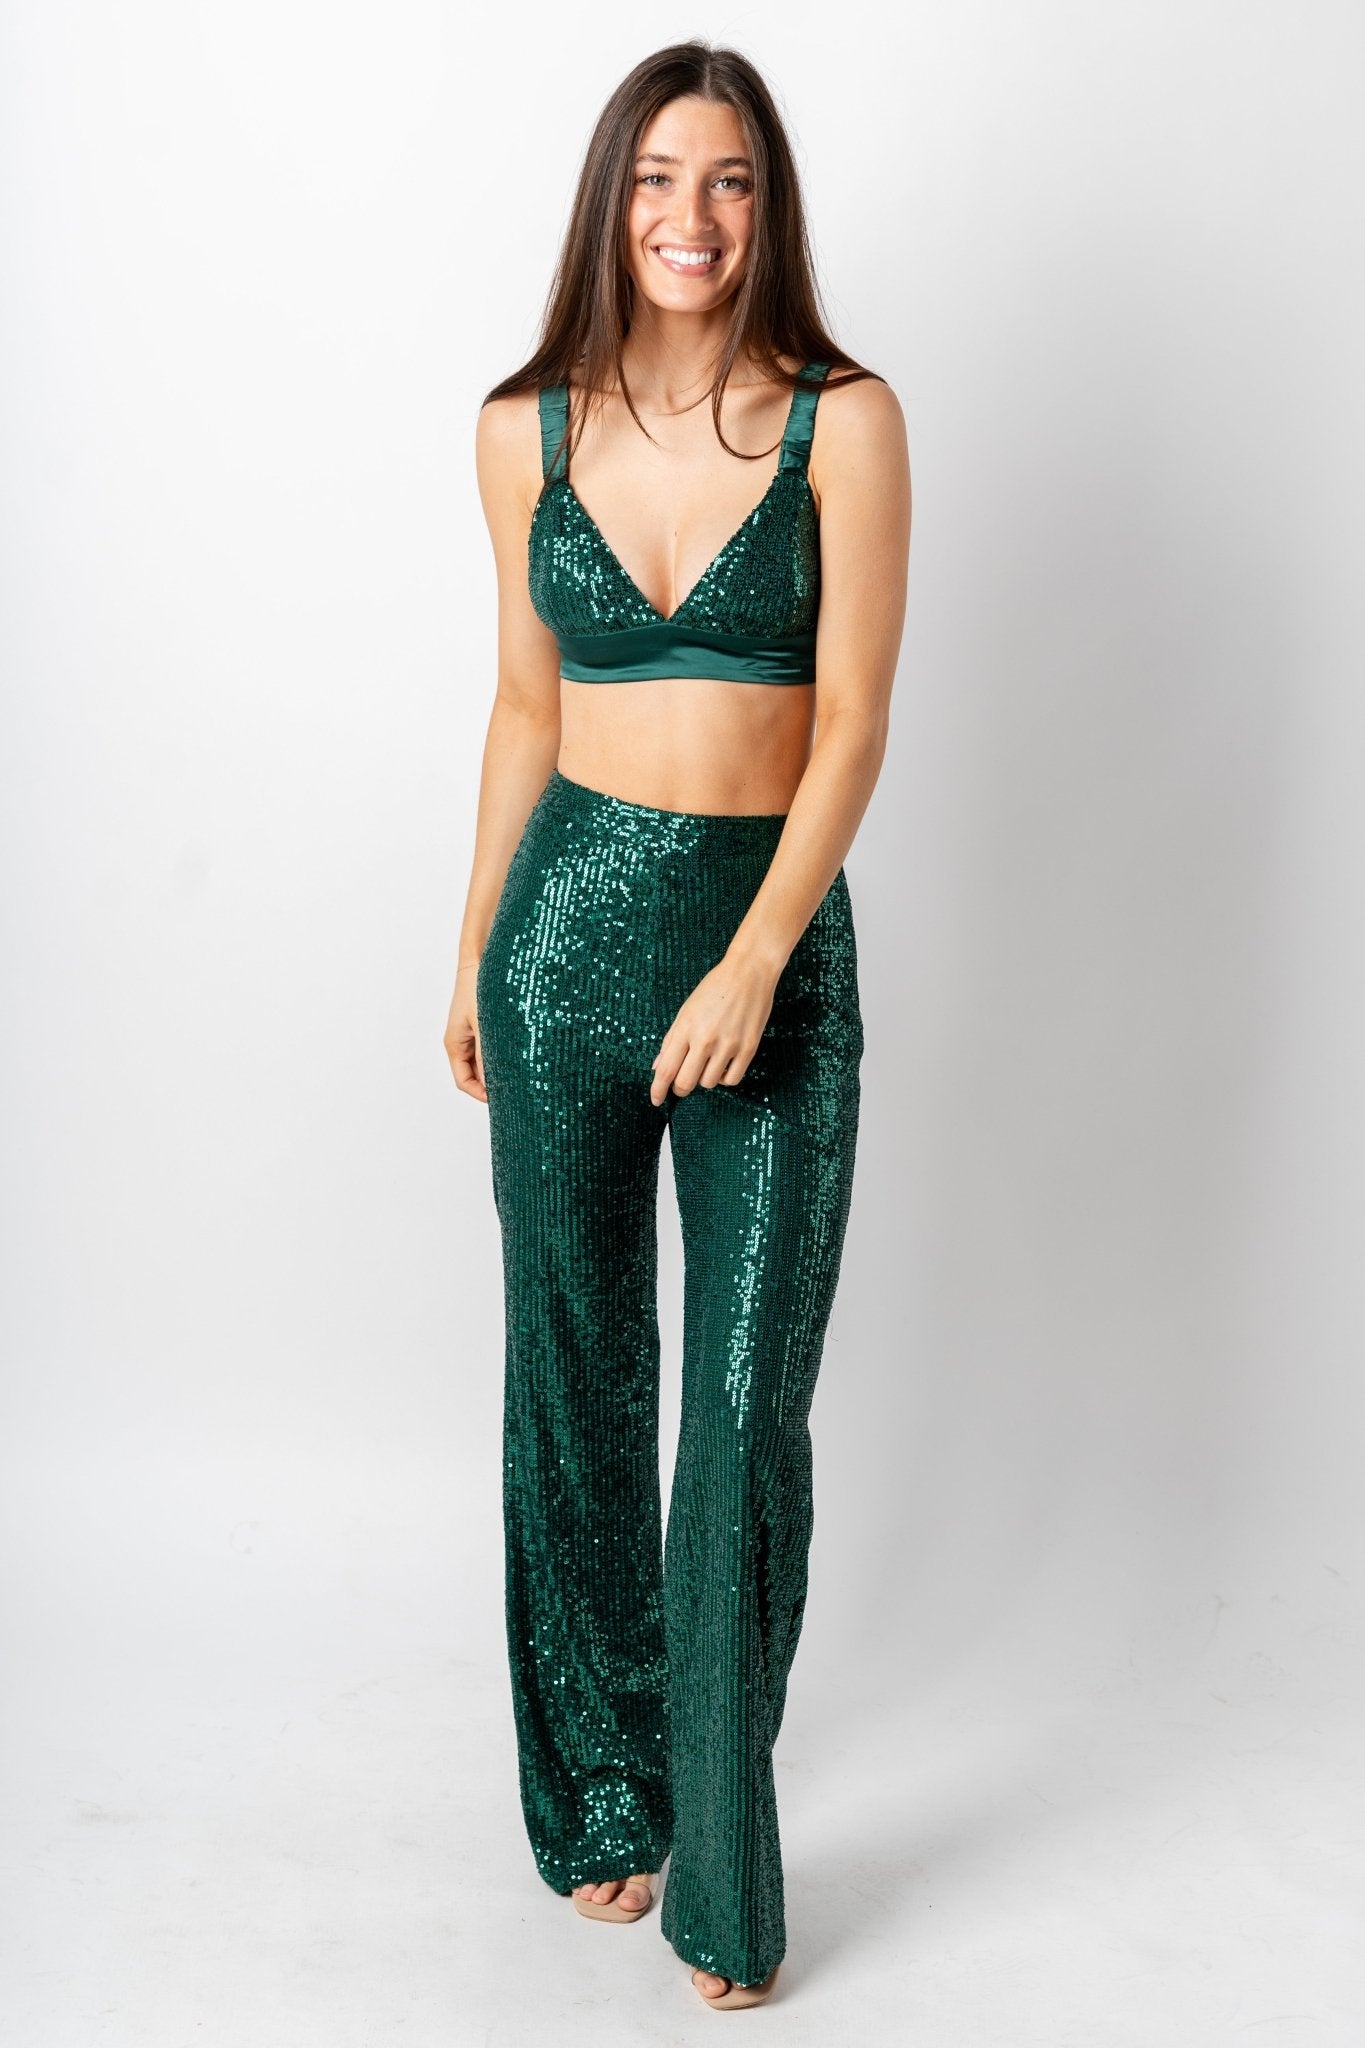 Sequin bralette top green - Affordable Bralette - Boutique Bras and Bralettes at Lush Fashion Lounge Boutique in Oklahoma City